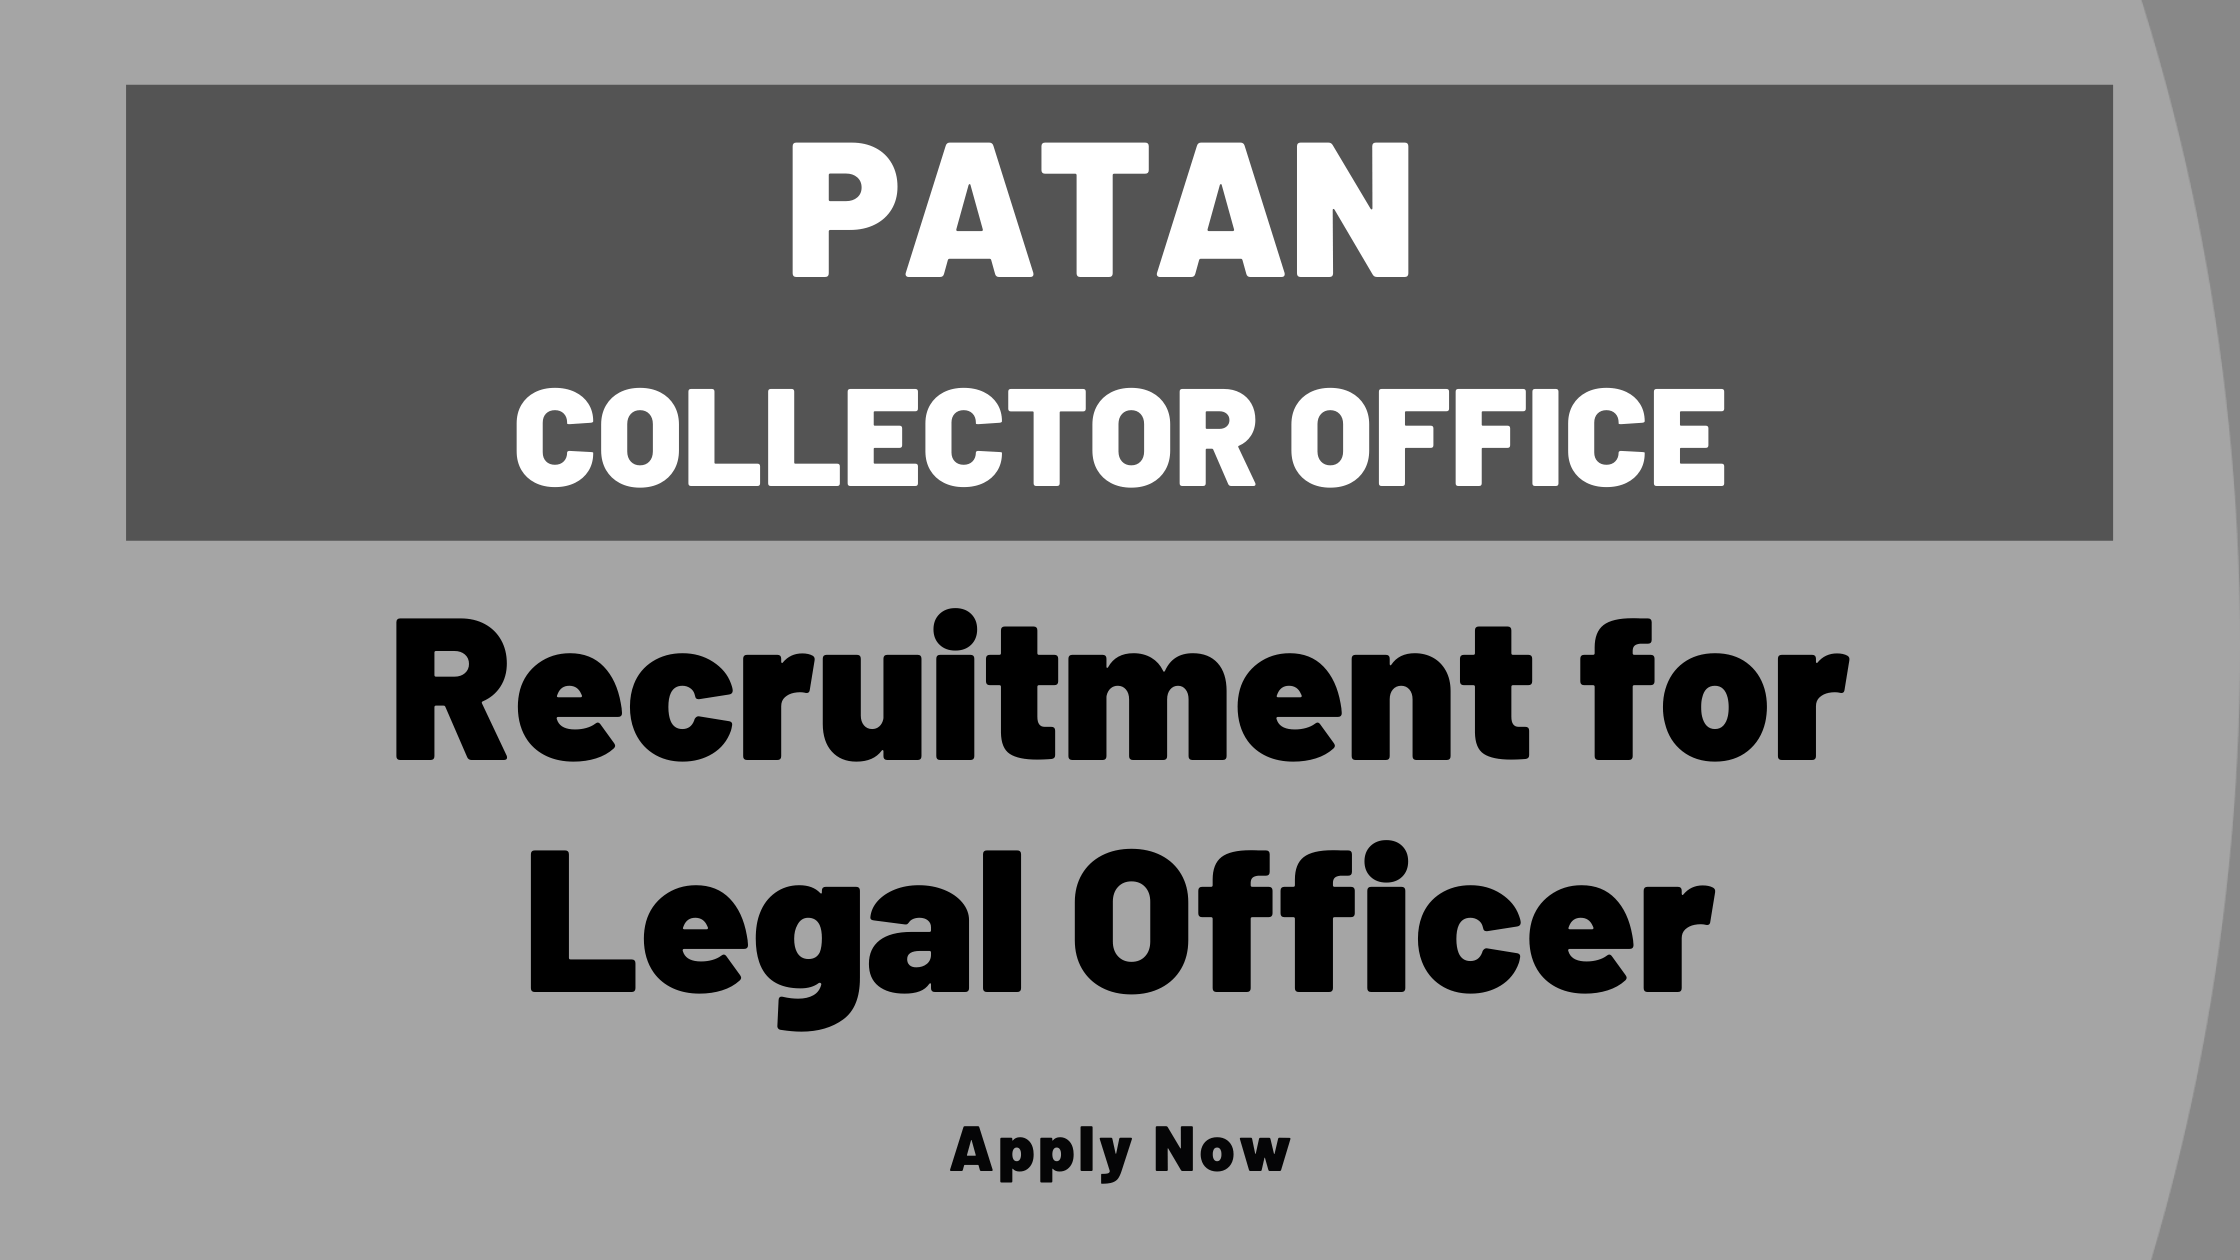 Patan Collector Officer Recruitment for Legal Officer